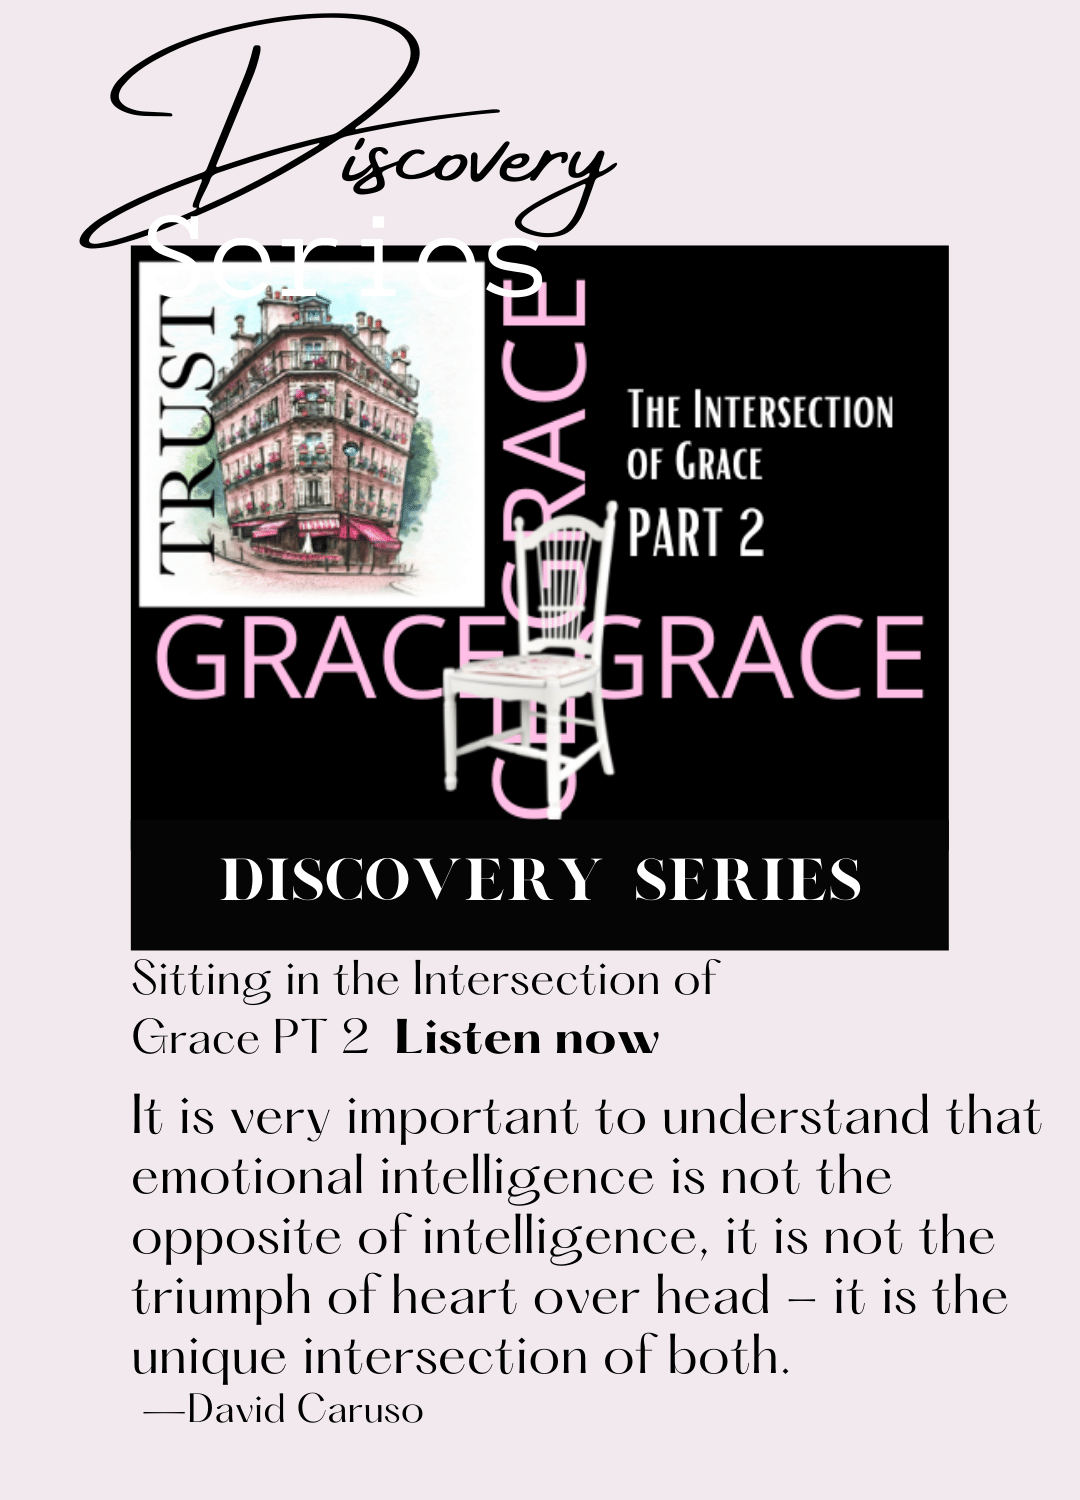 The intersection fo Grace part 2 episode 